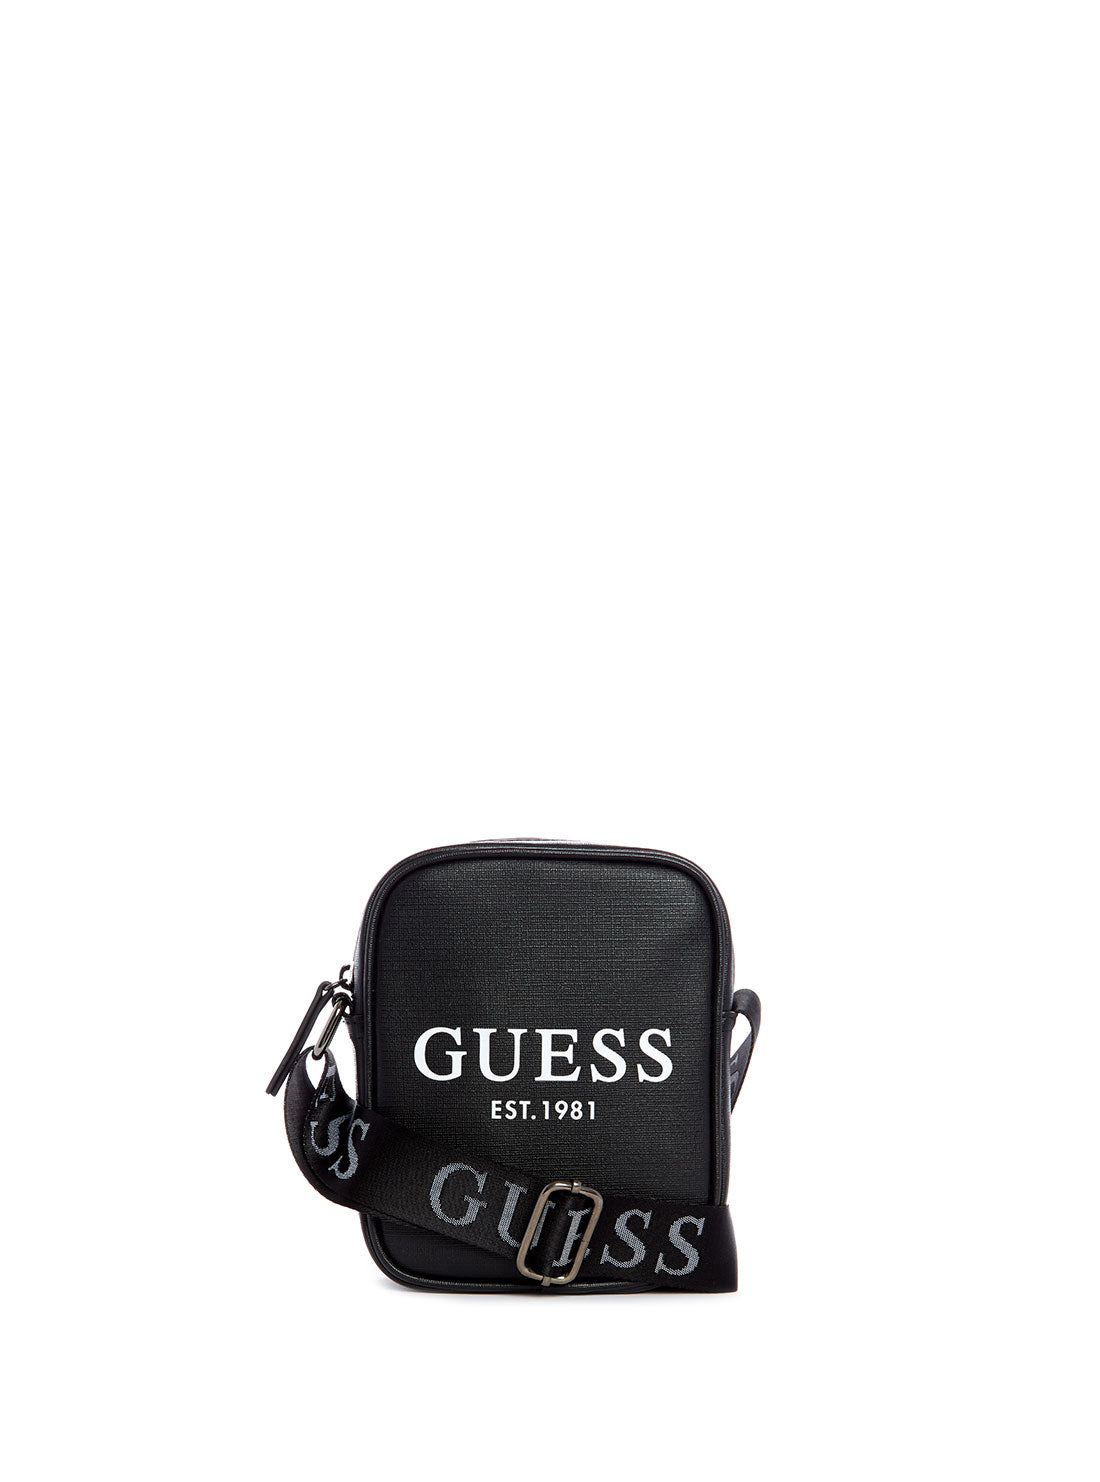 GUESS Men's Black Outfitter Crossbody Bag VY753592 Front View